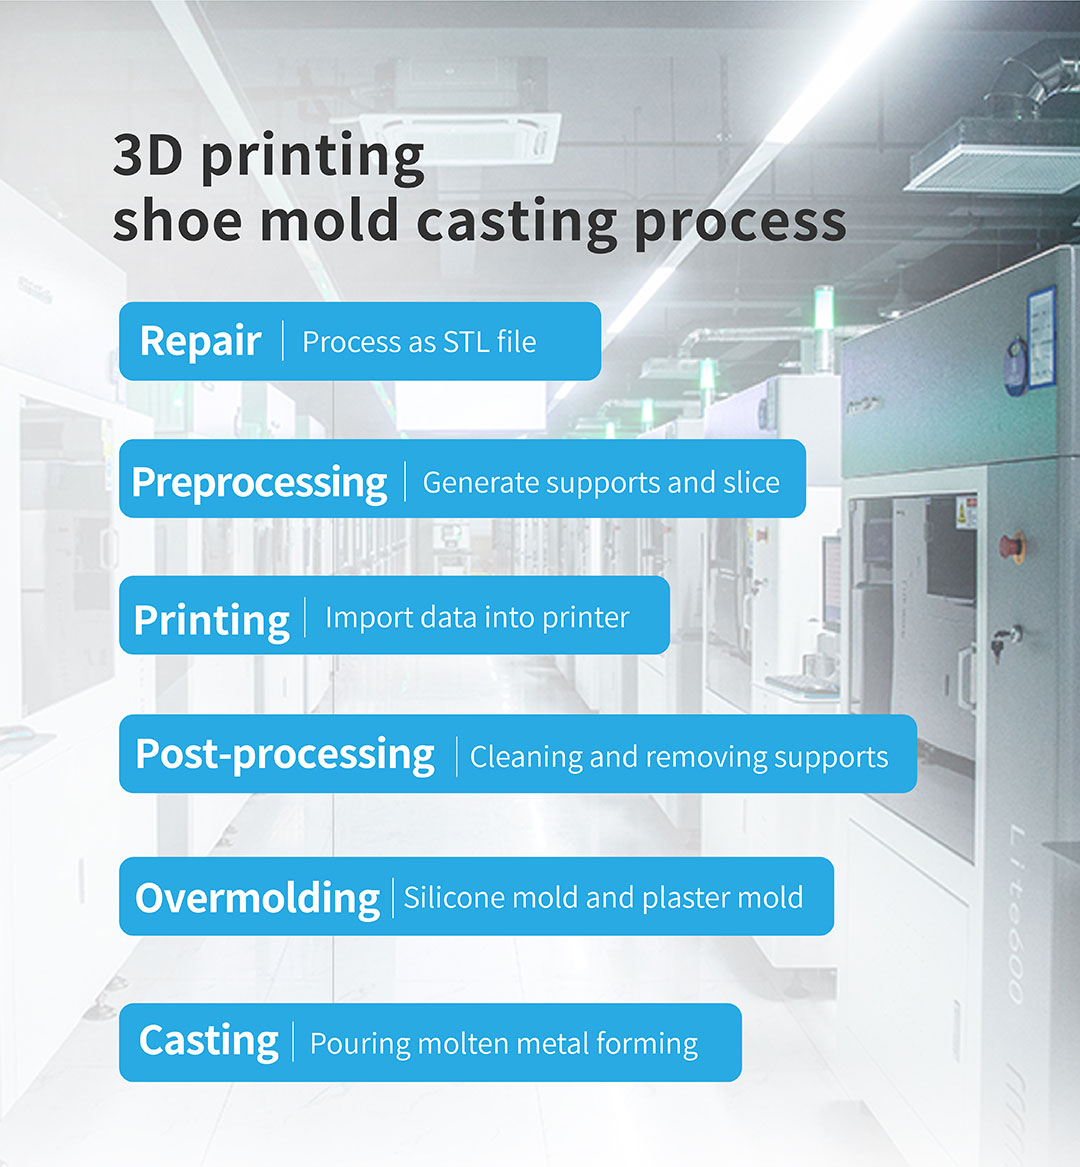 Uniontech's 3D Printing Solution For The Footwear Industry Empowers